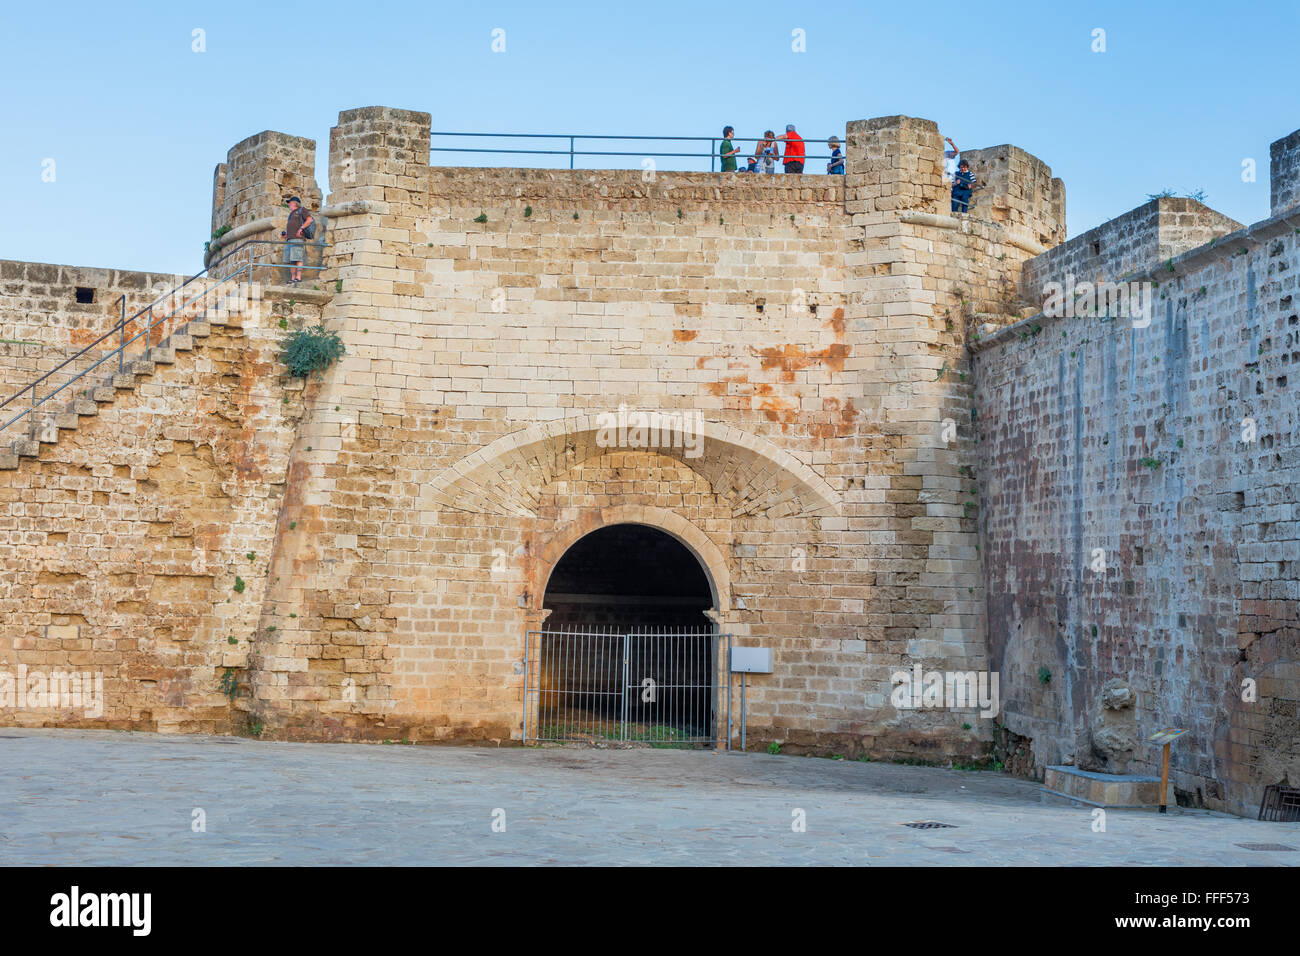 Citadel tower and walls, Famagusta, Northern Cyprus Stock Photo